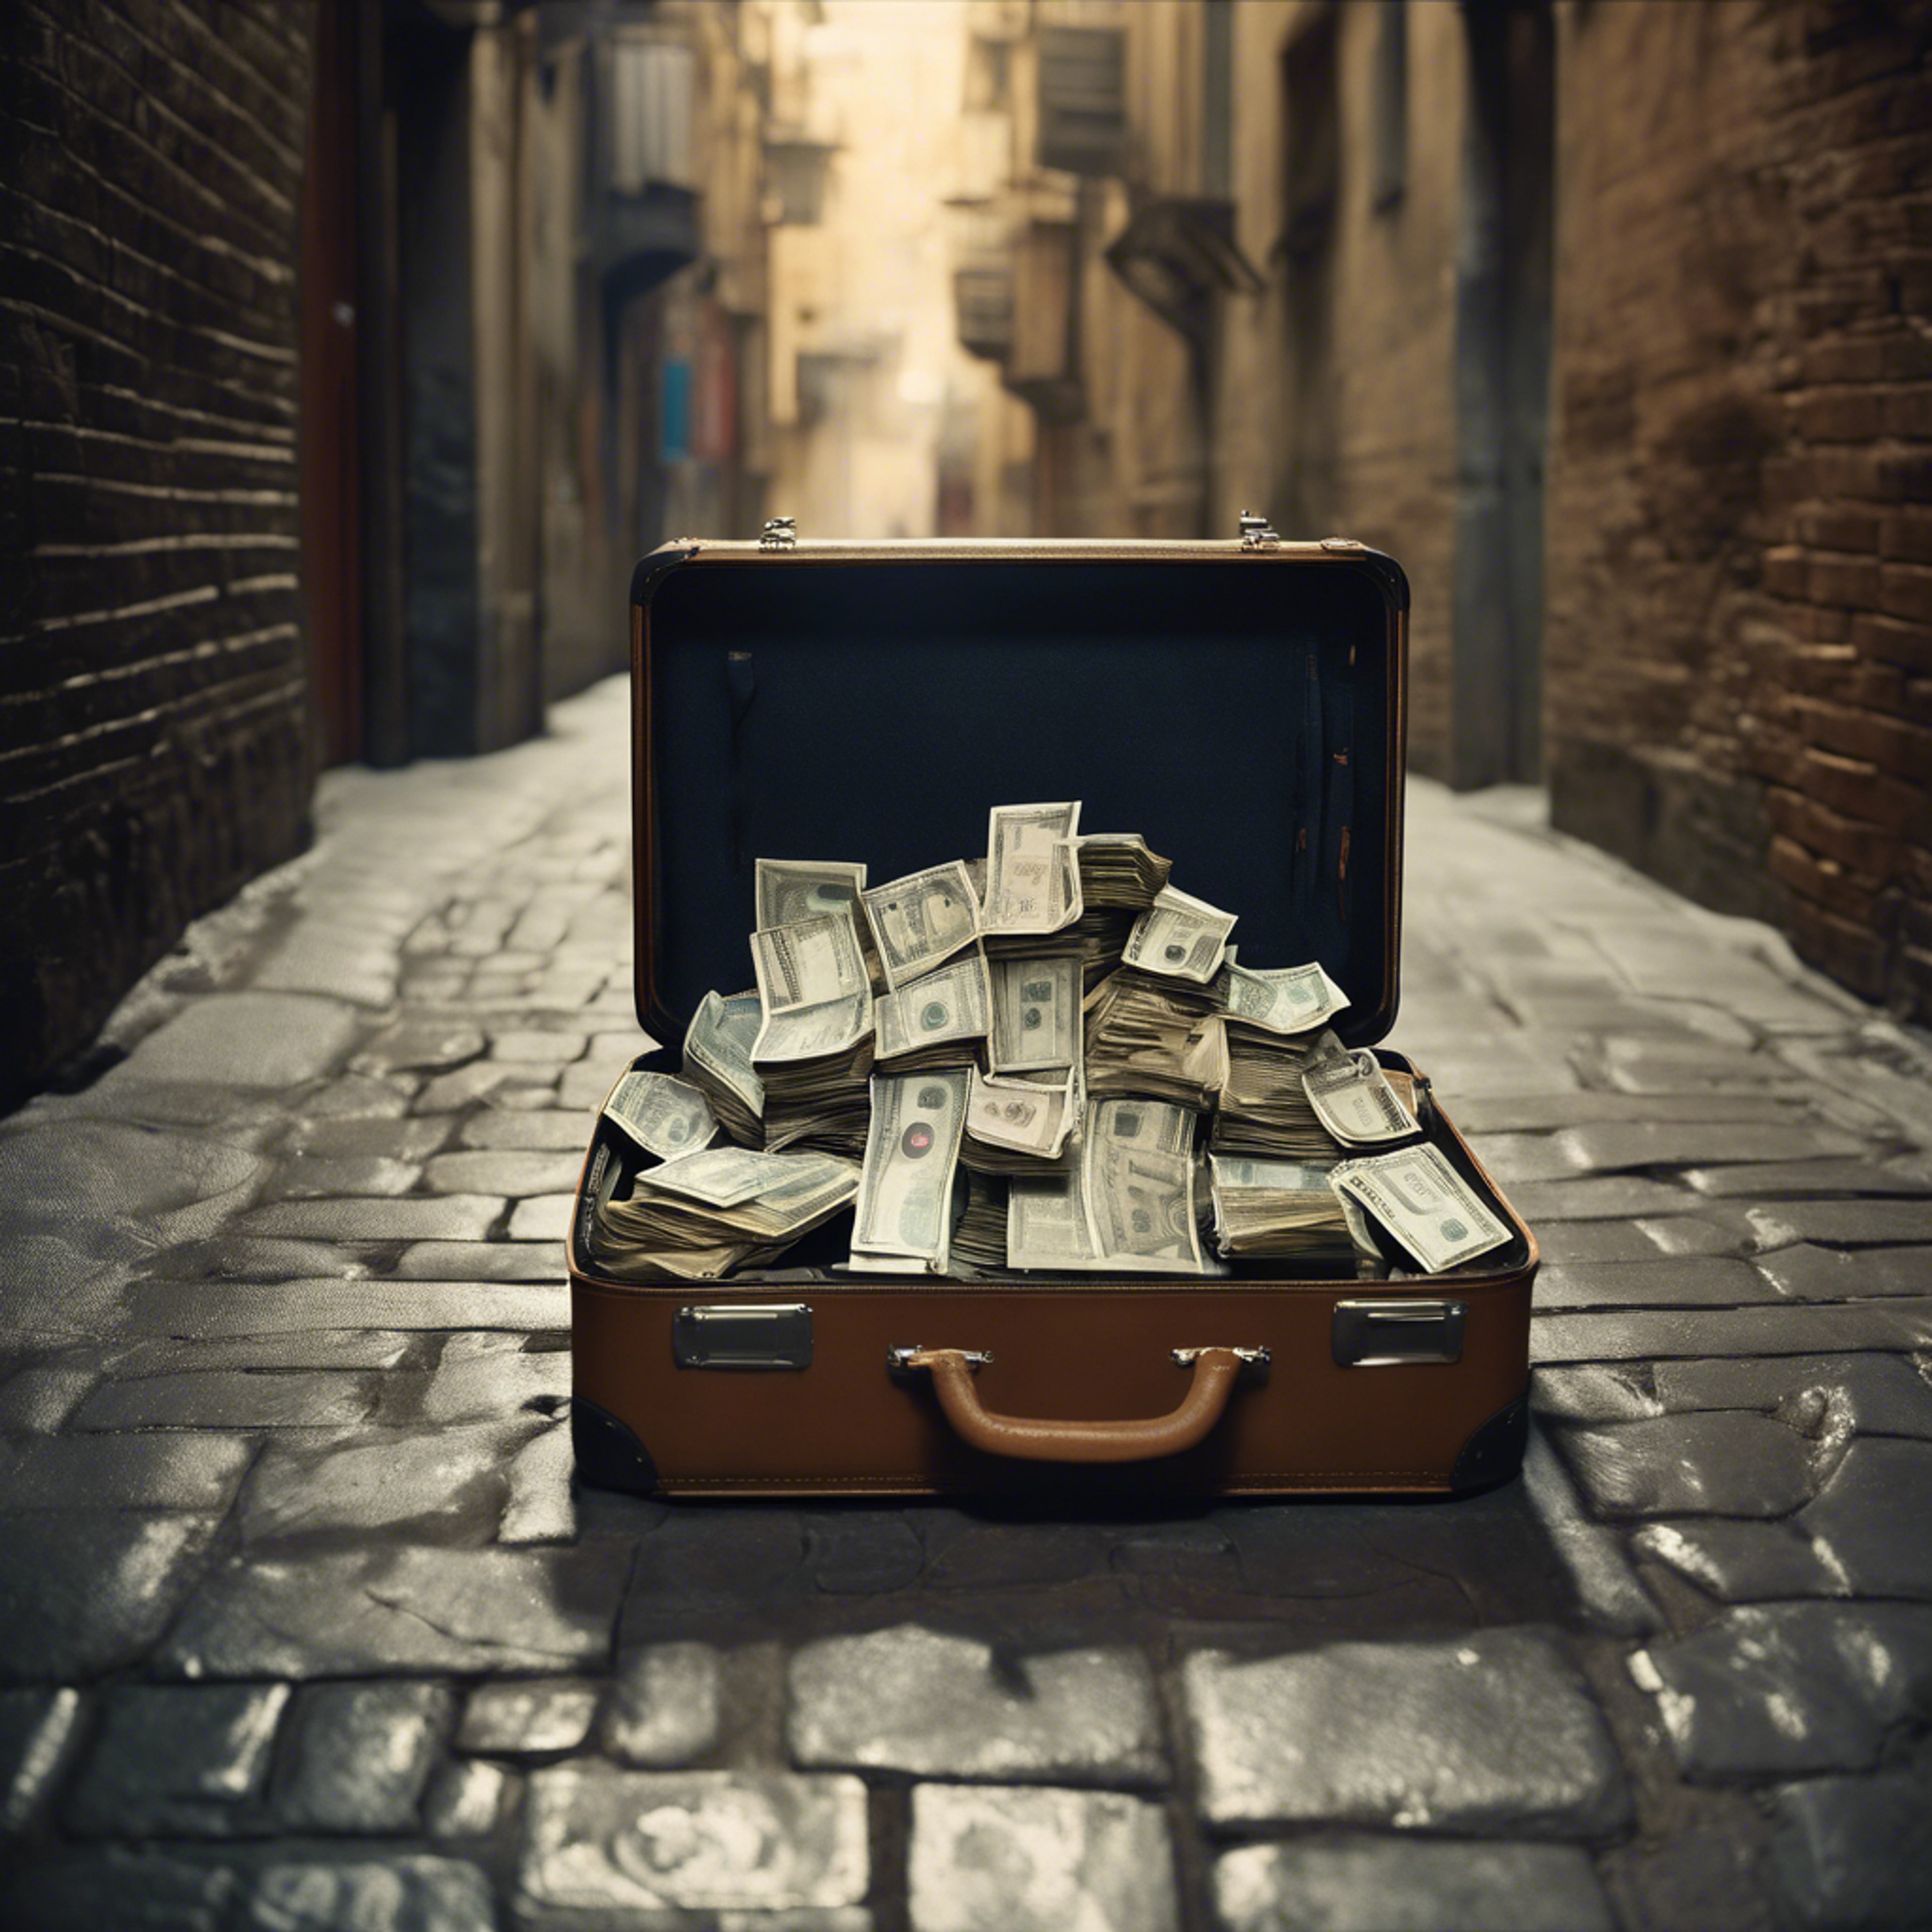 A suitcase filled with mafia money being exchanged in dimly lit alleyway. Kertas dinding[001aead7b2c840f5bbce]